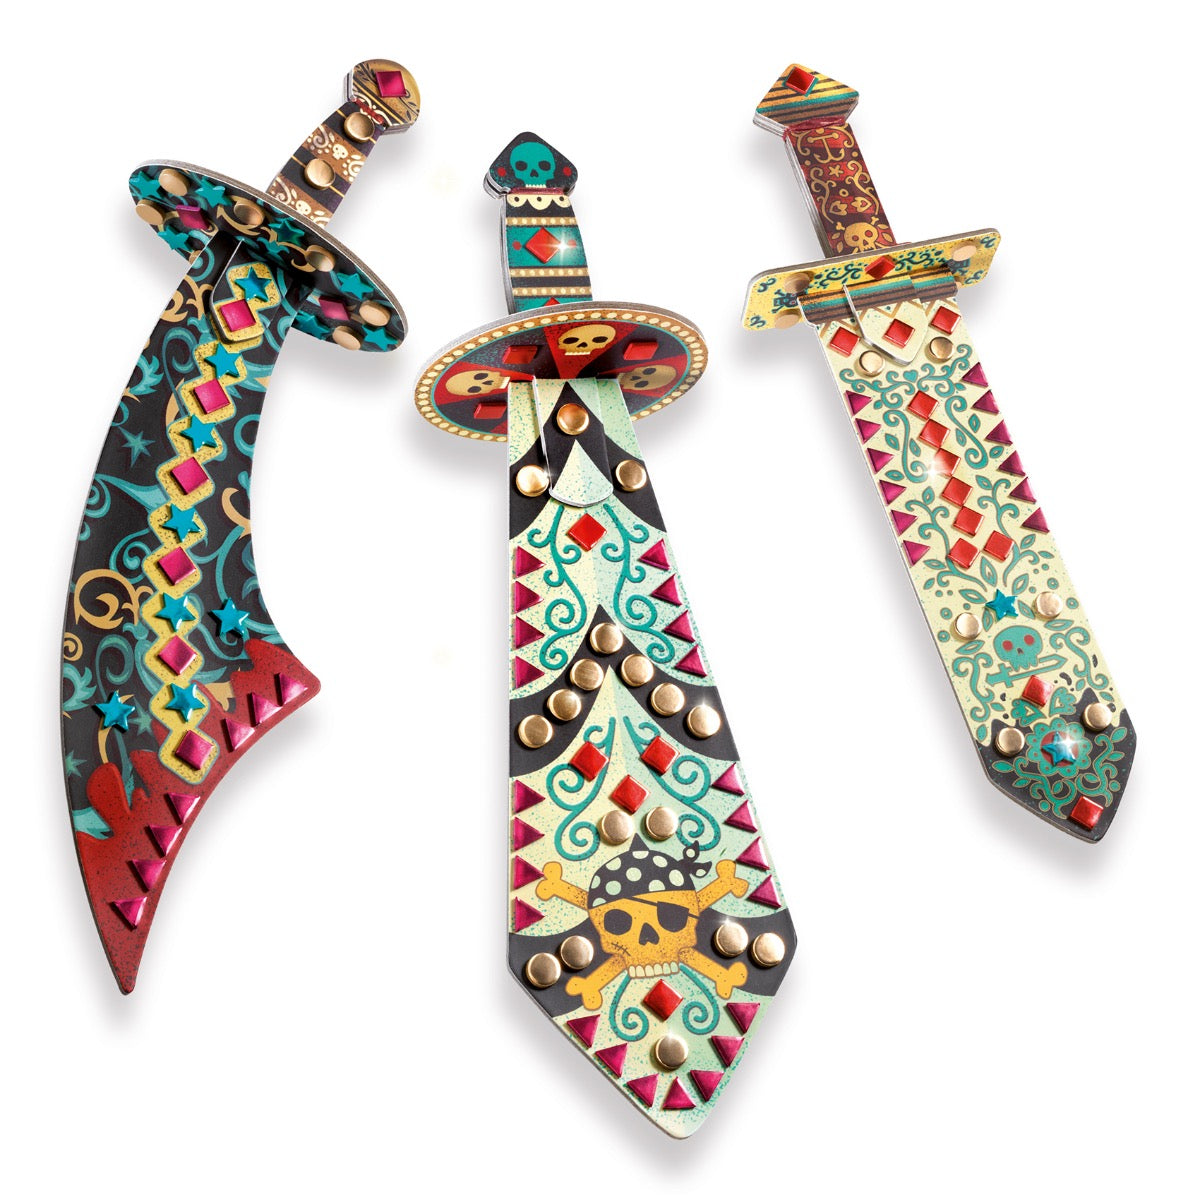 Djeco Do It Yourself - 3 Mosaic Swords to Decorate Like a Pirate